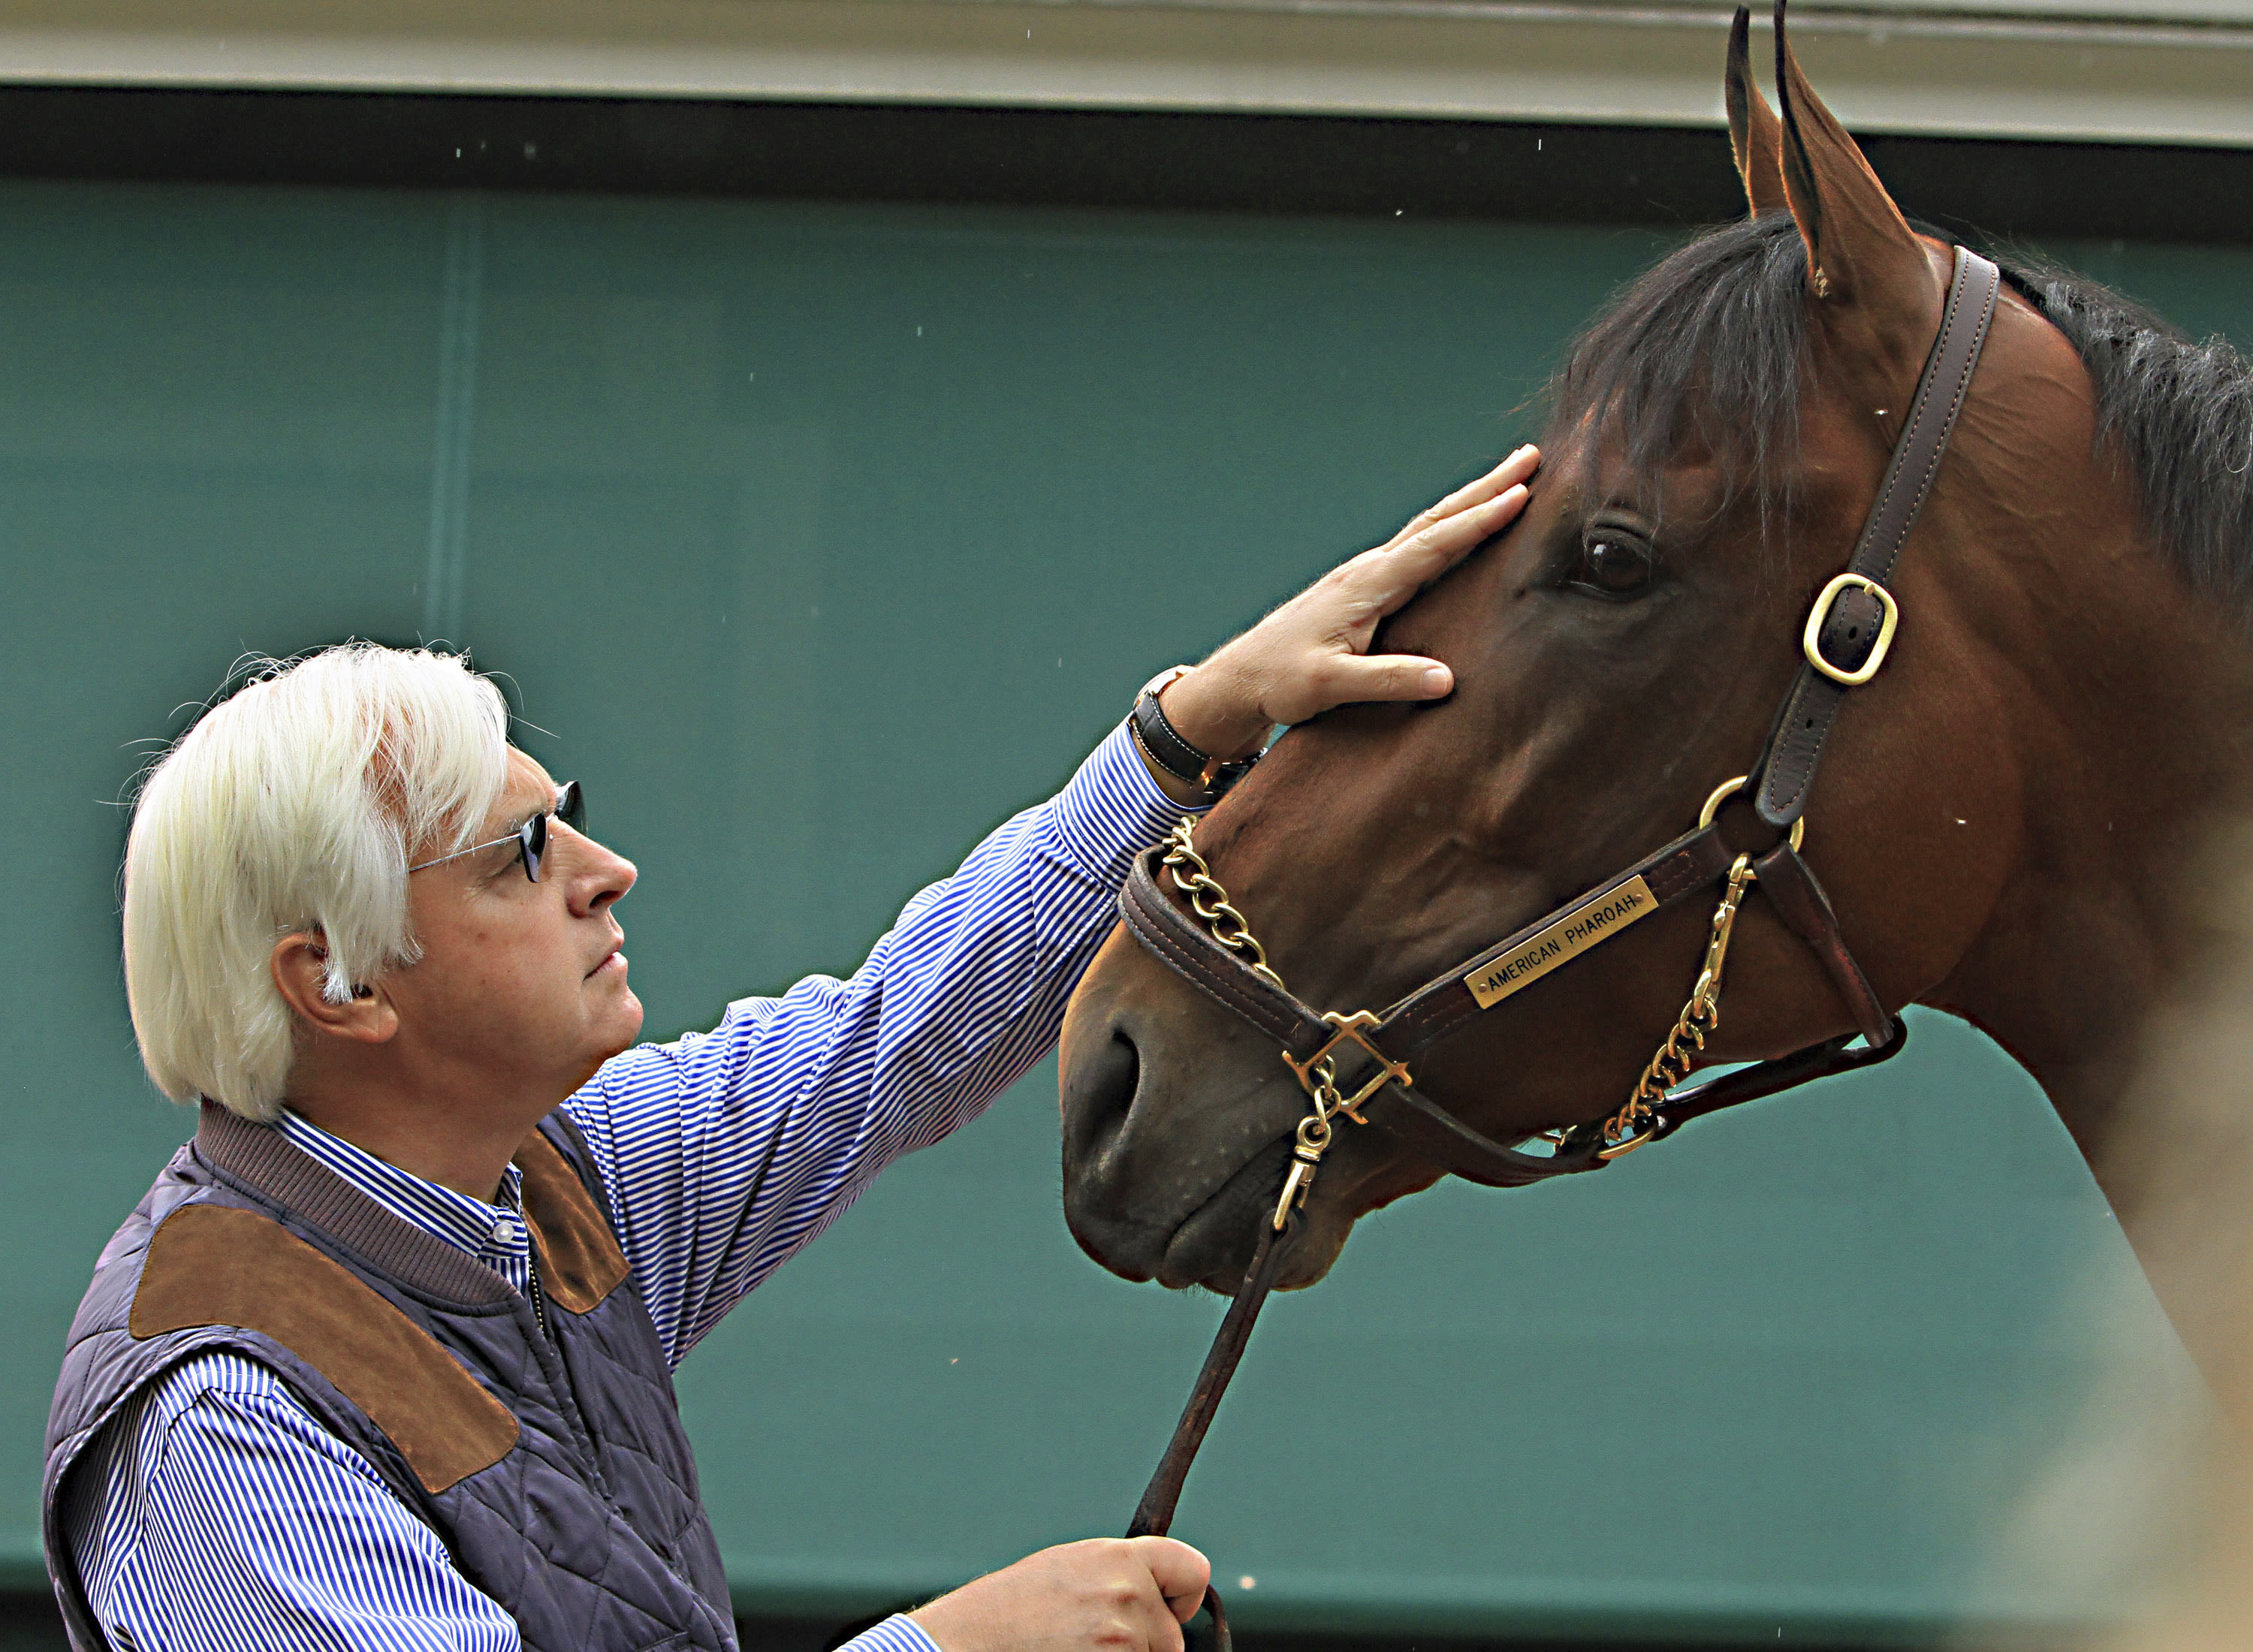 Horse racing's household name will miss the 150th Kentucky Derby. Bob Baffert is exiled for 3rd year